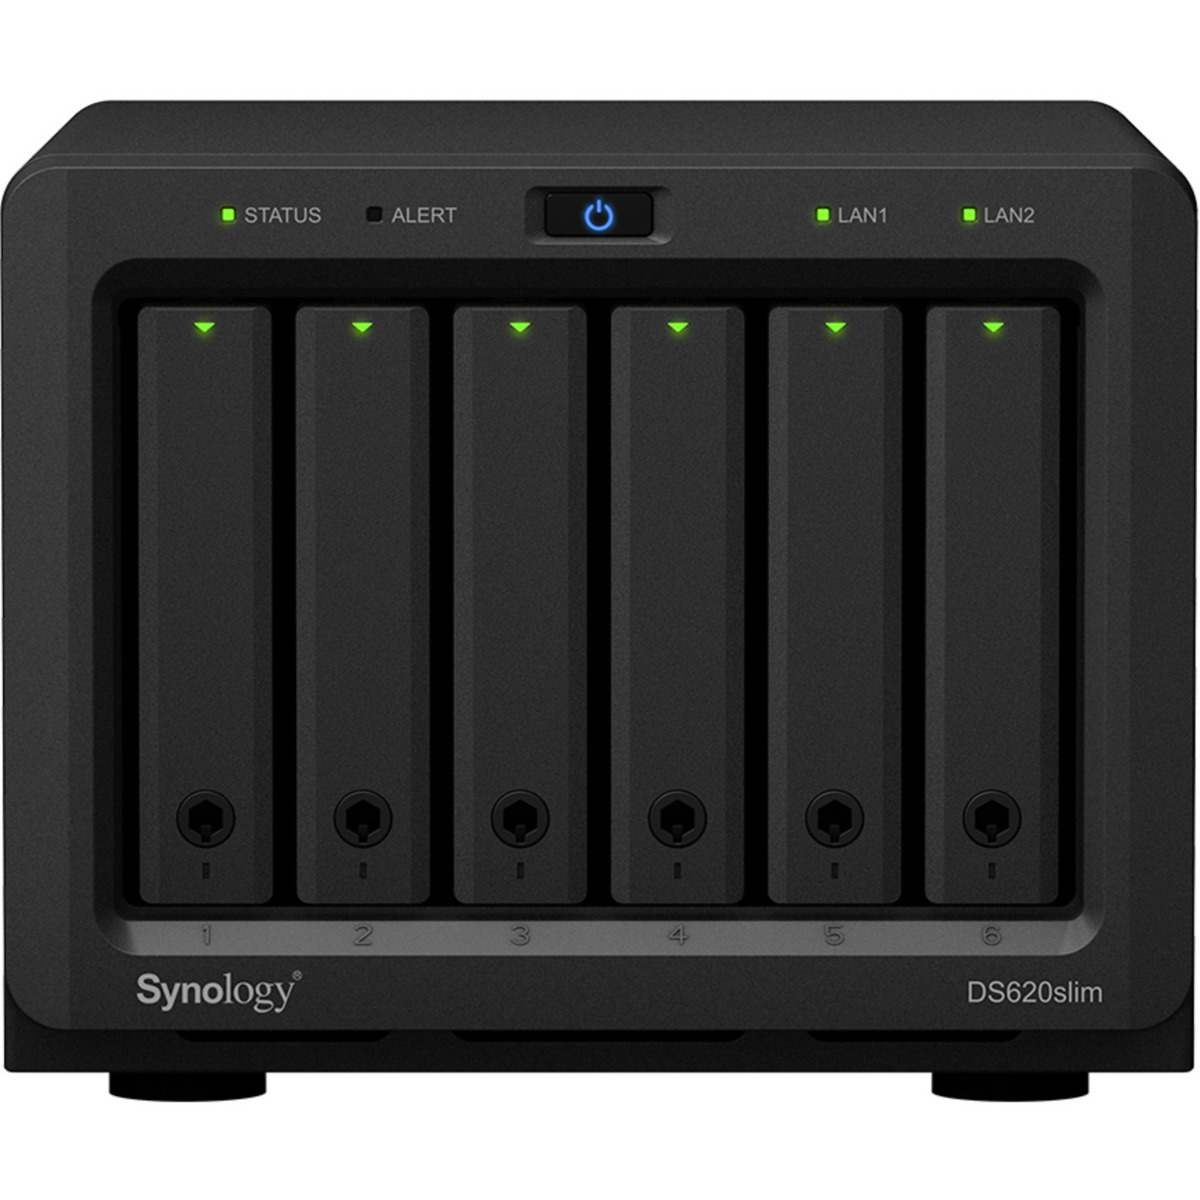 Synology DiskStation DS620slim 35tb 6-Bay Desktop Multimedia / Power User / Business NAS - Network Attached Storage Device 5x7tb Synology SAT5210 Series SAT5210-7000G 2.5 530/500MB/s SATA 6Gb/s SSD ENTERPRISE Class Drives Installed - Burn-In Tested - FREE RAM UPGRADE DiskStation DS620slim